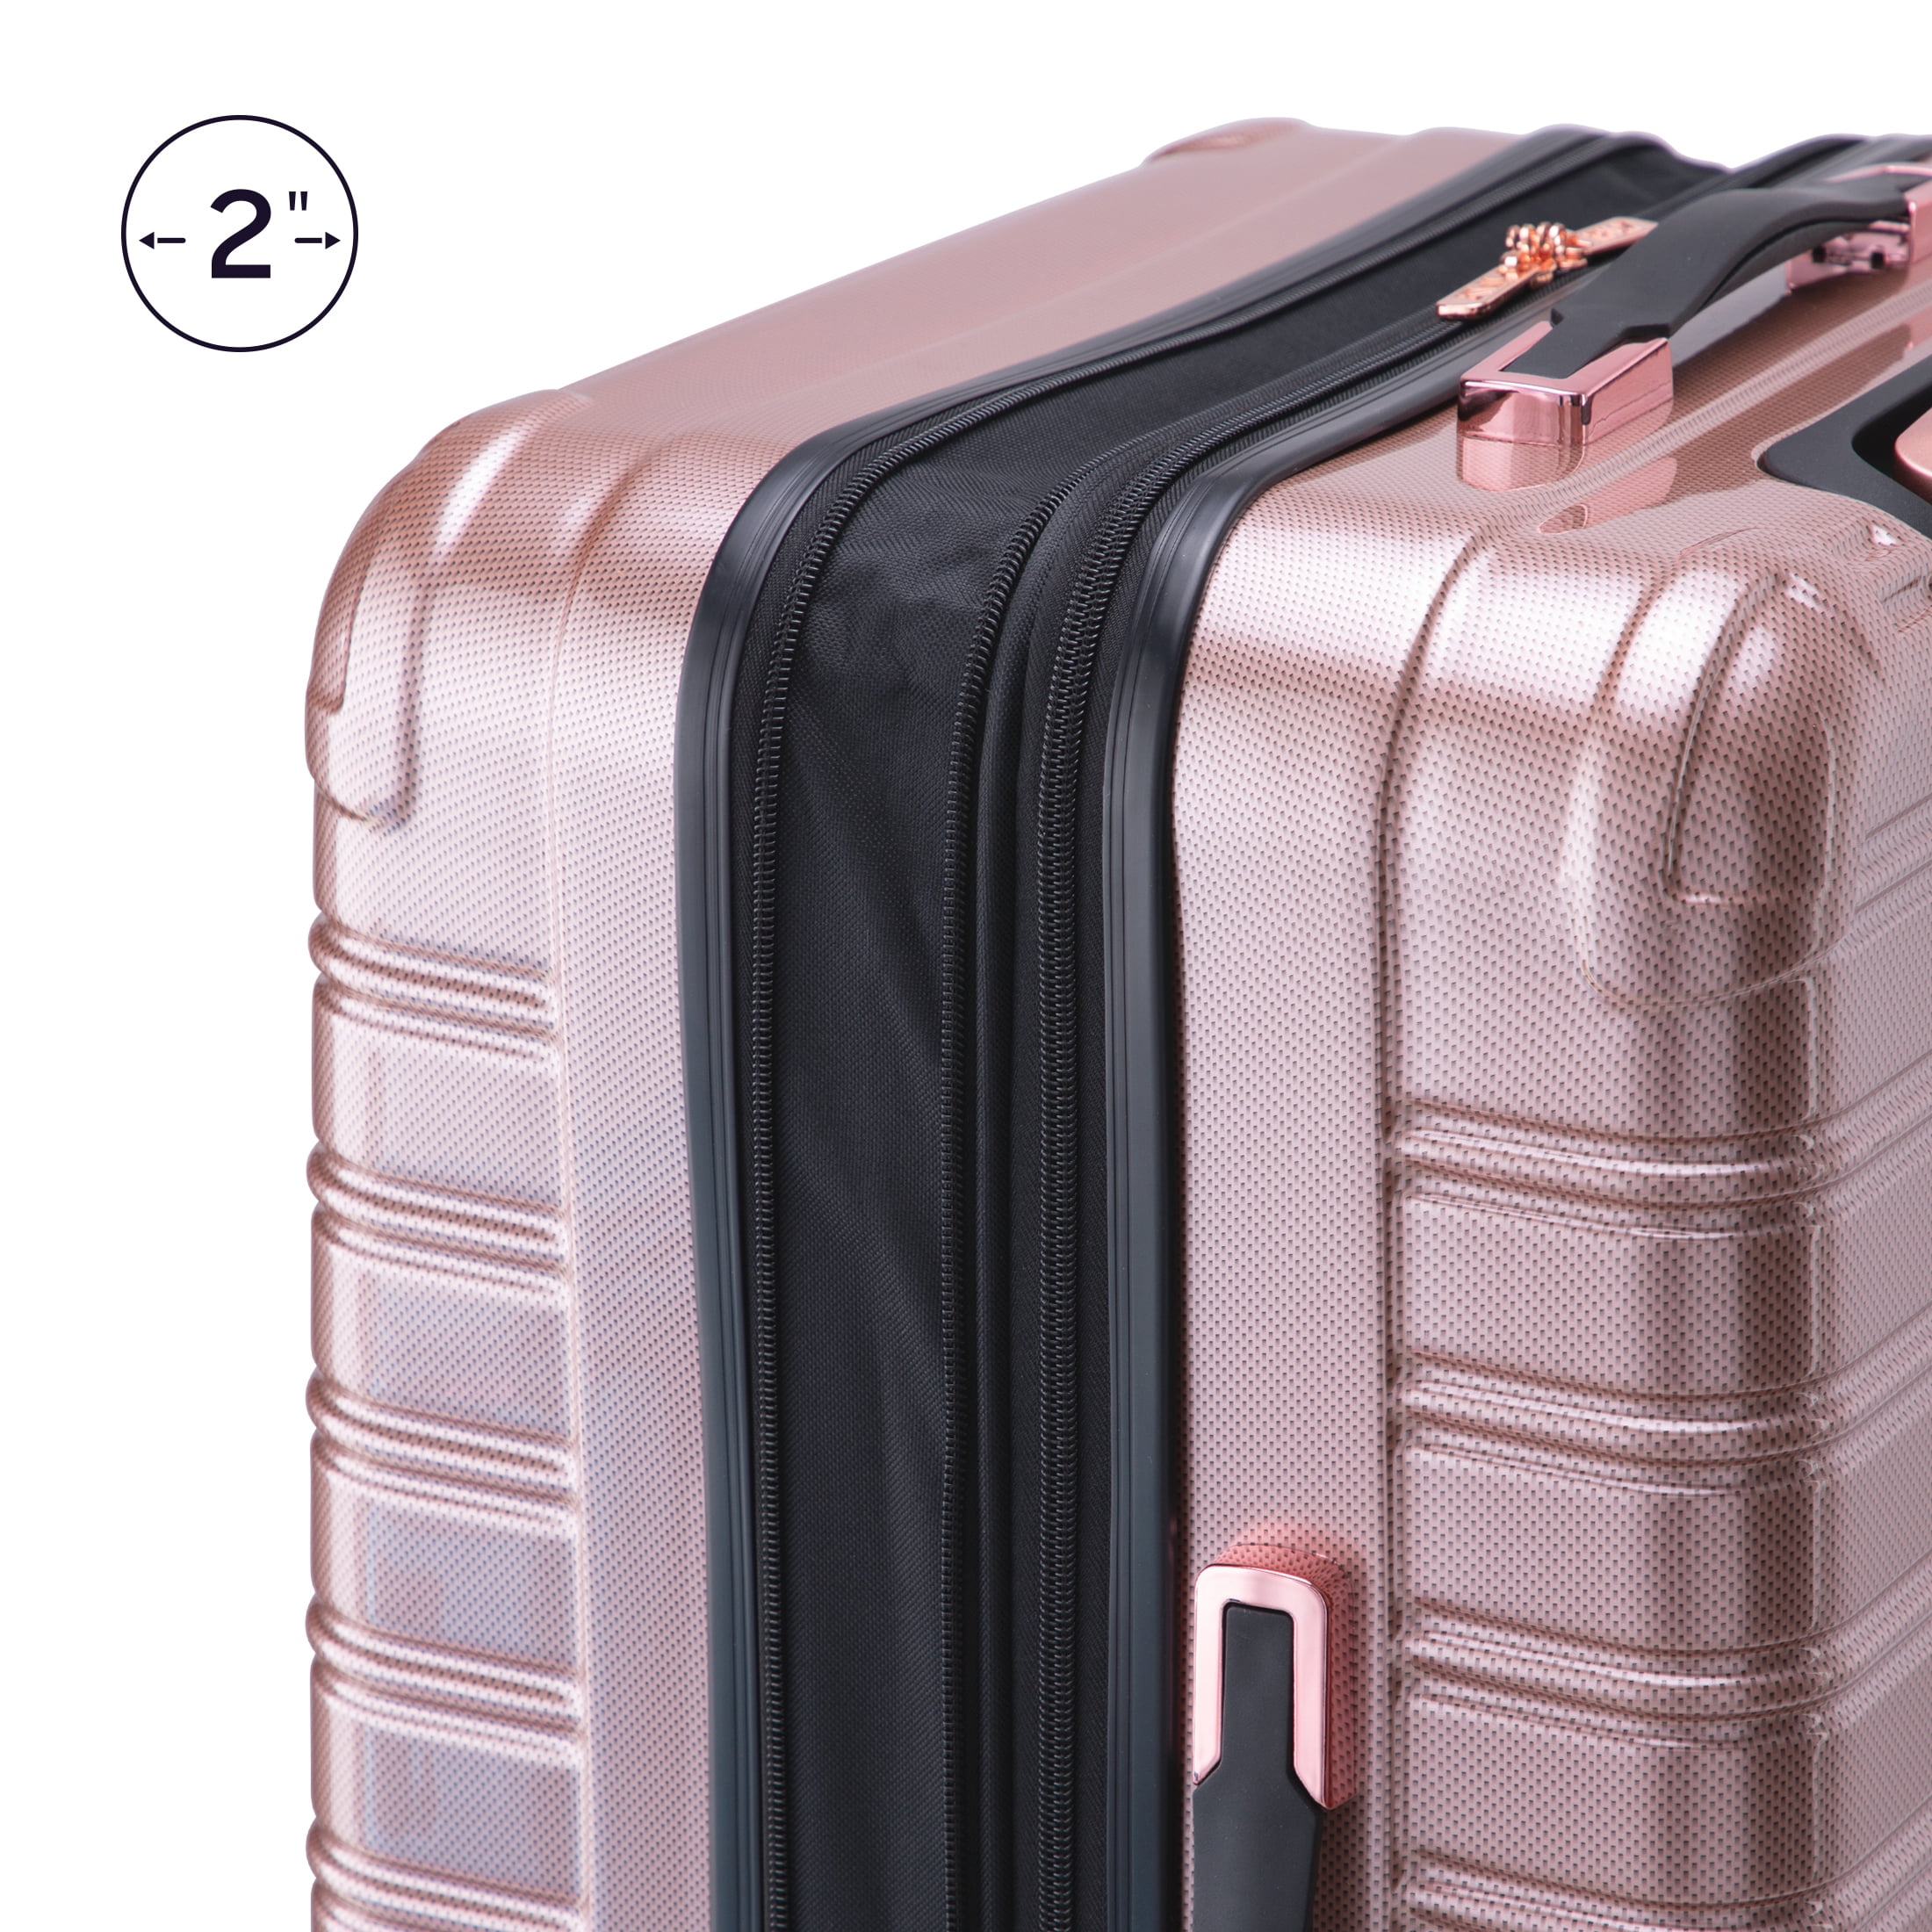 iFLY Hardside Luggage Fibertech 2 Piece Set, 20-inch Carry-on and 28-inch Checked Luggage, Rose Gold - 3